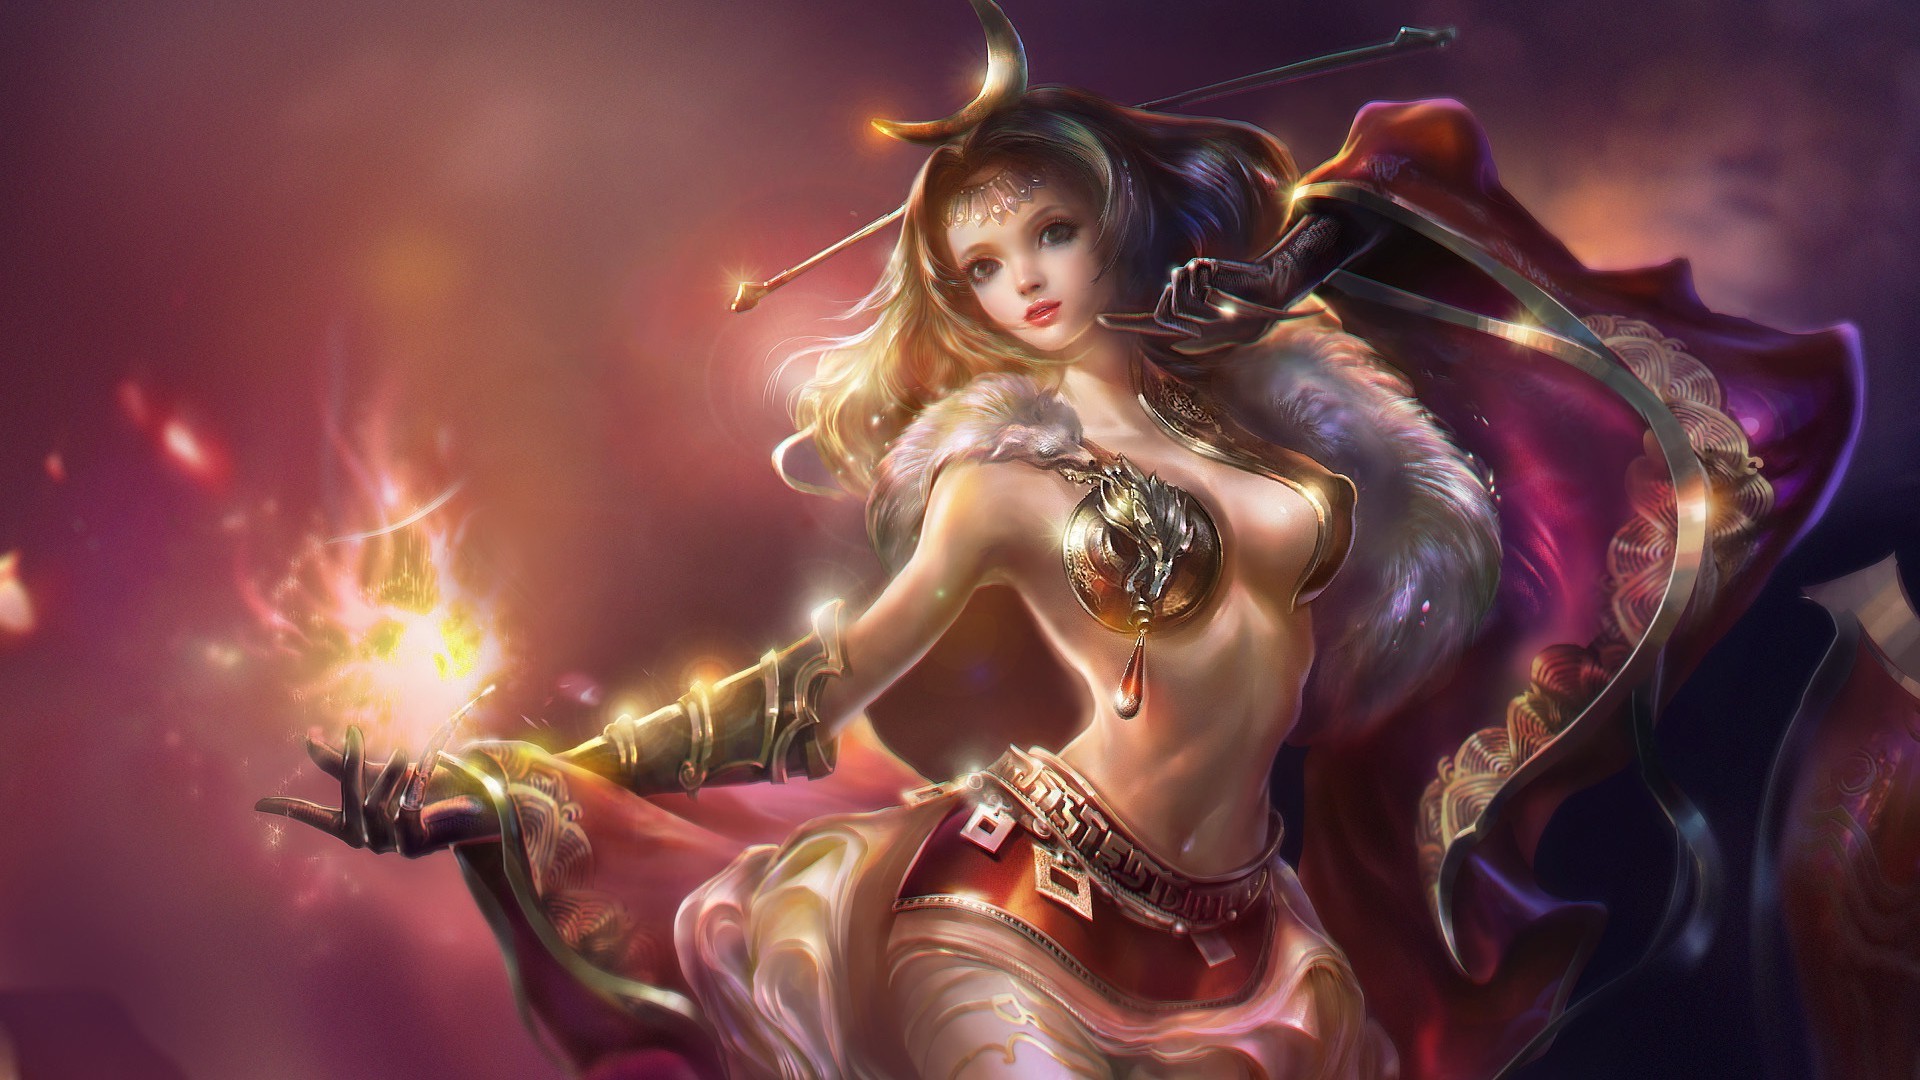 Witch Fantasy Magic Art Party Woman Christmas Gold - Woman Warrior - HD Wallpaper 